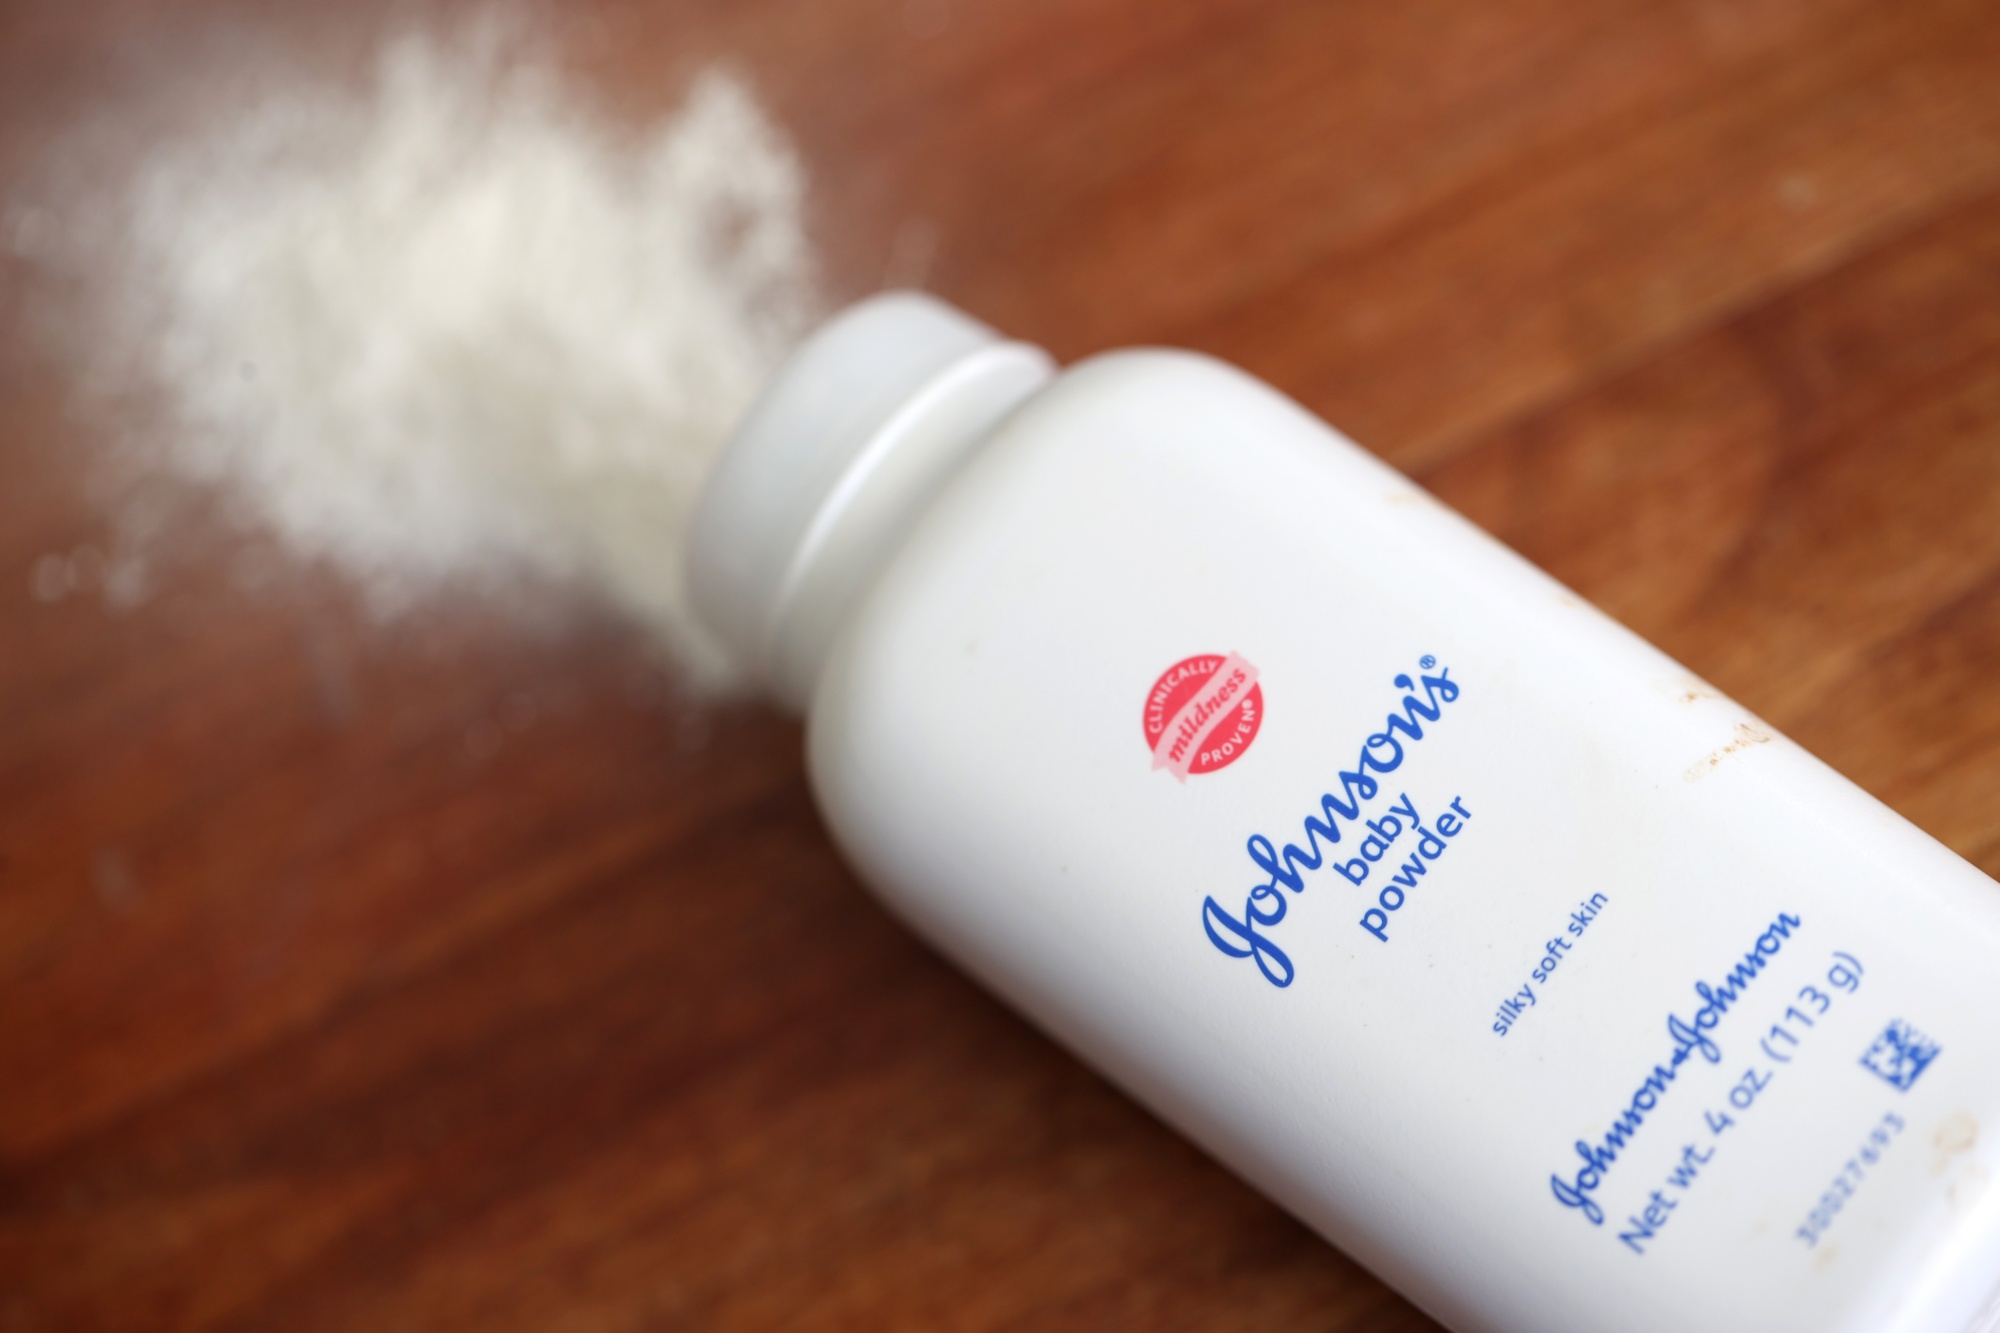 Johnson & Johnson faces push to force global ban on talc baby